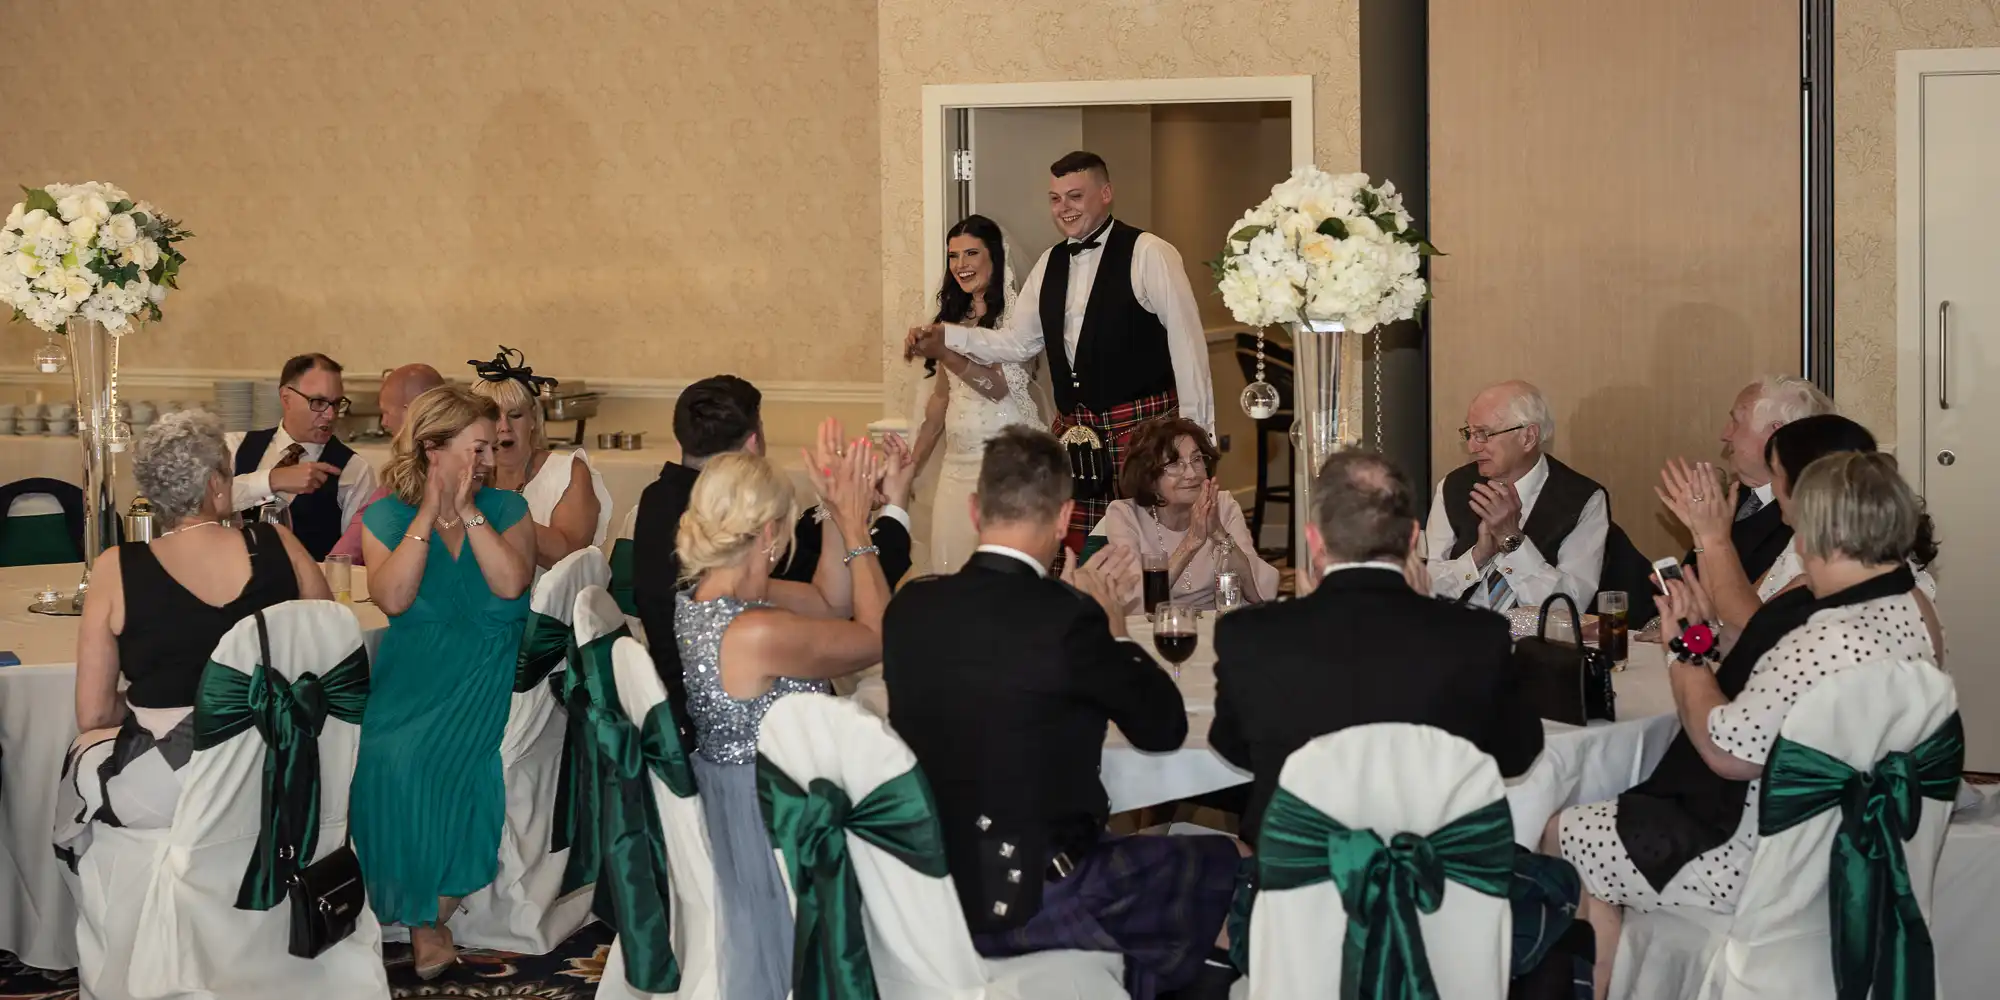 A bride and groom entering a banquet hall to applause from guests, with the groom wearing a kilt and the bride in a white dress.